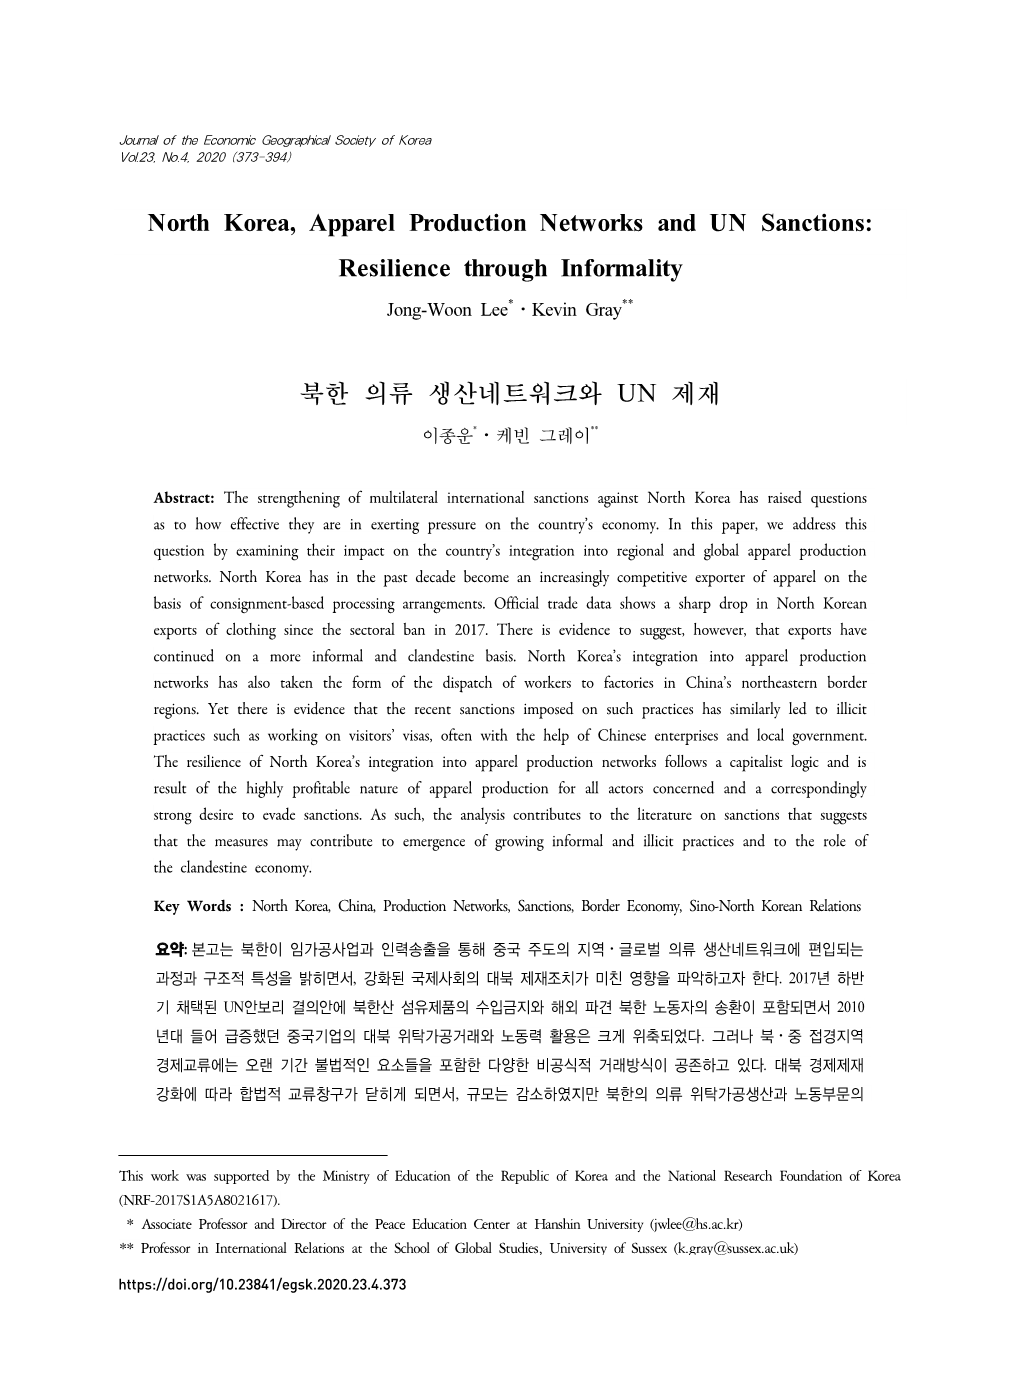 North Korea, Apparel Production Networks and UN Sanctions: Resilience Through Informality